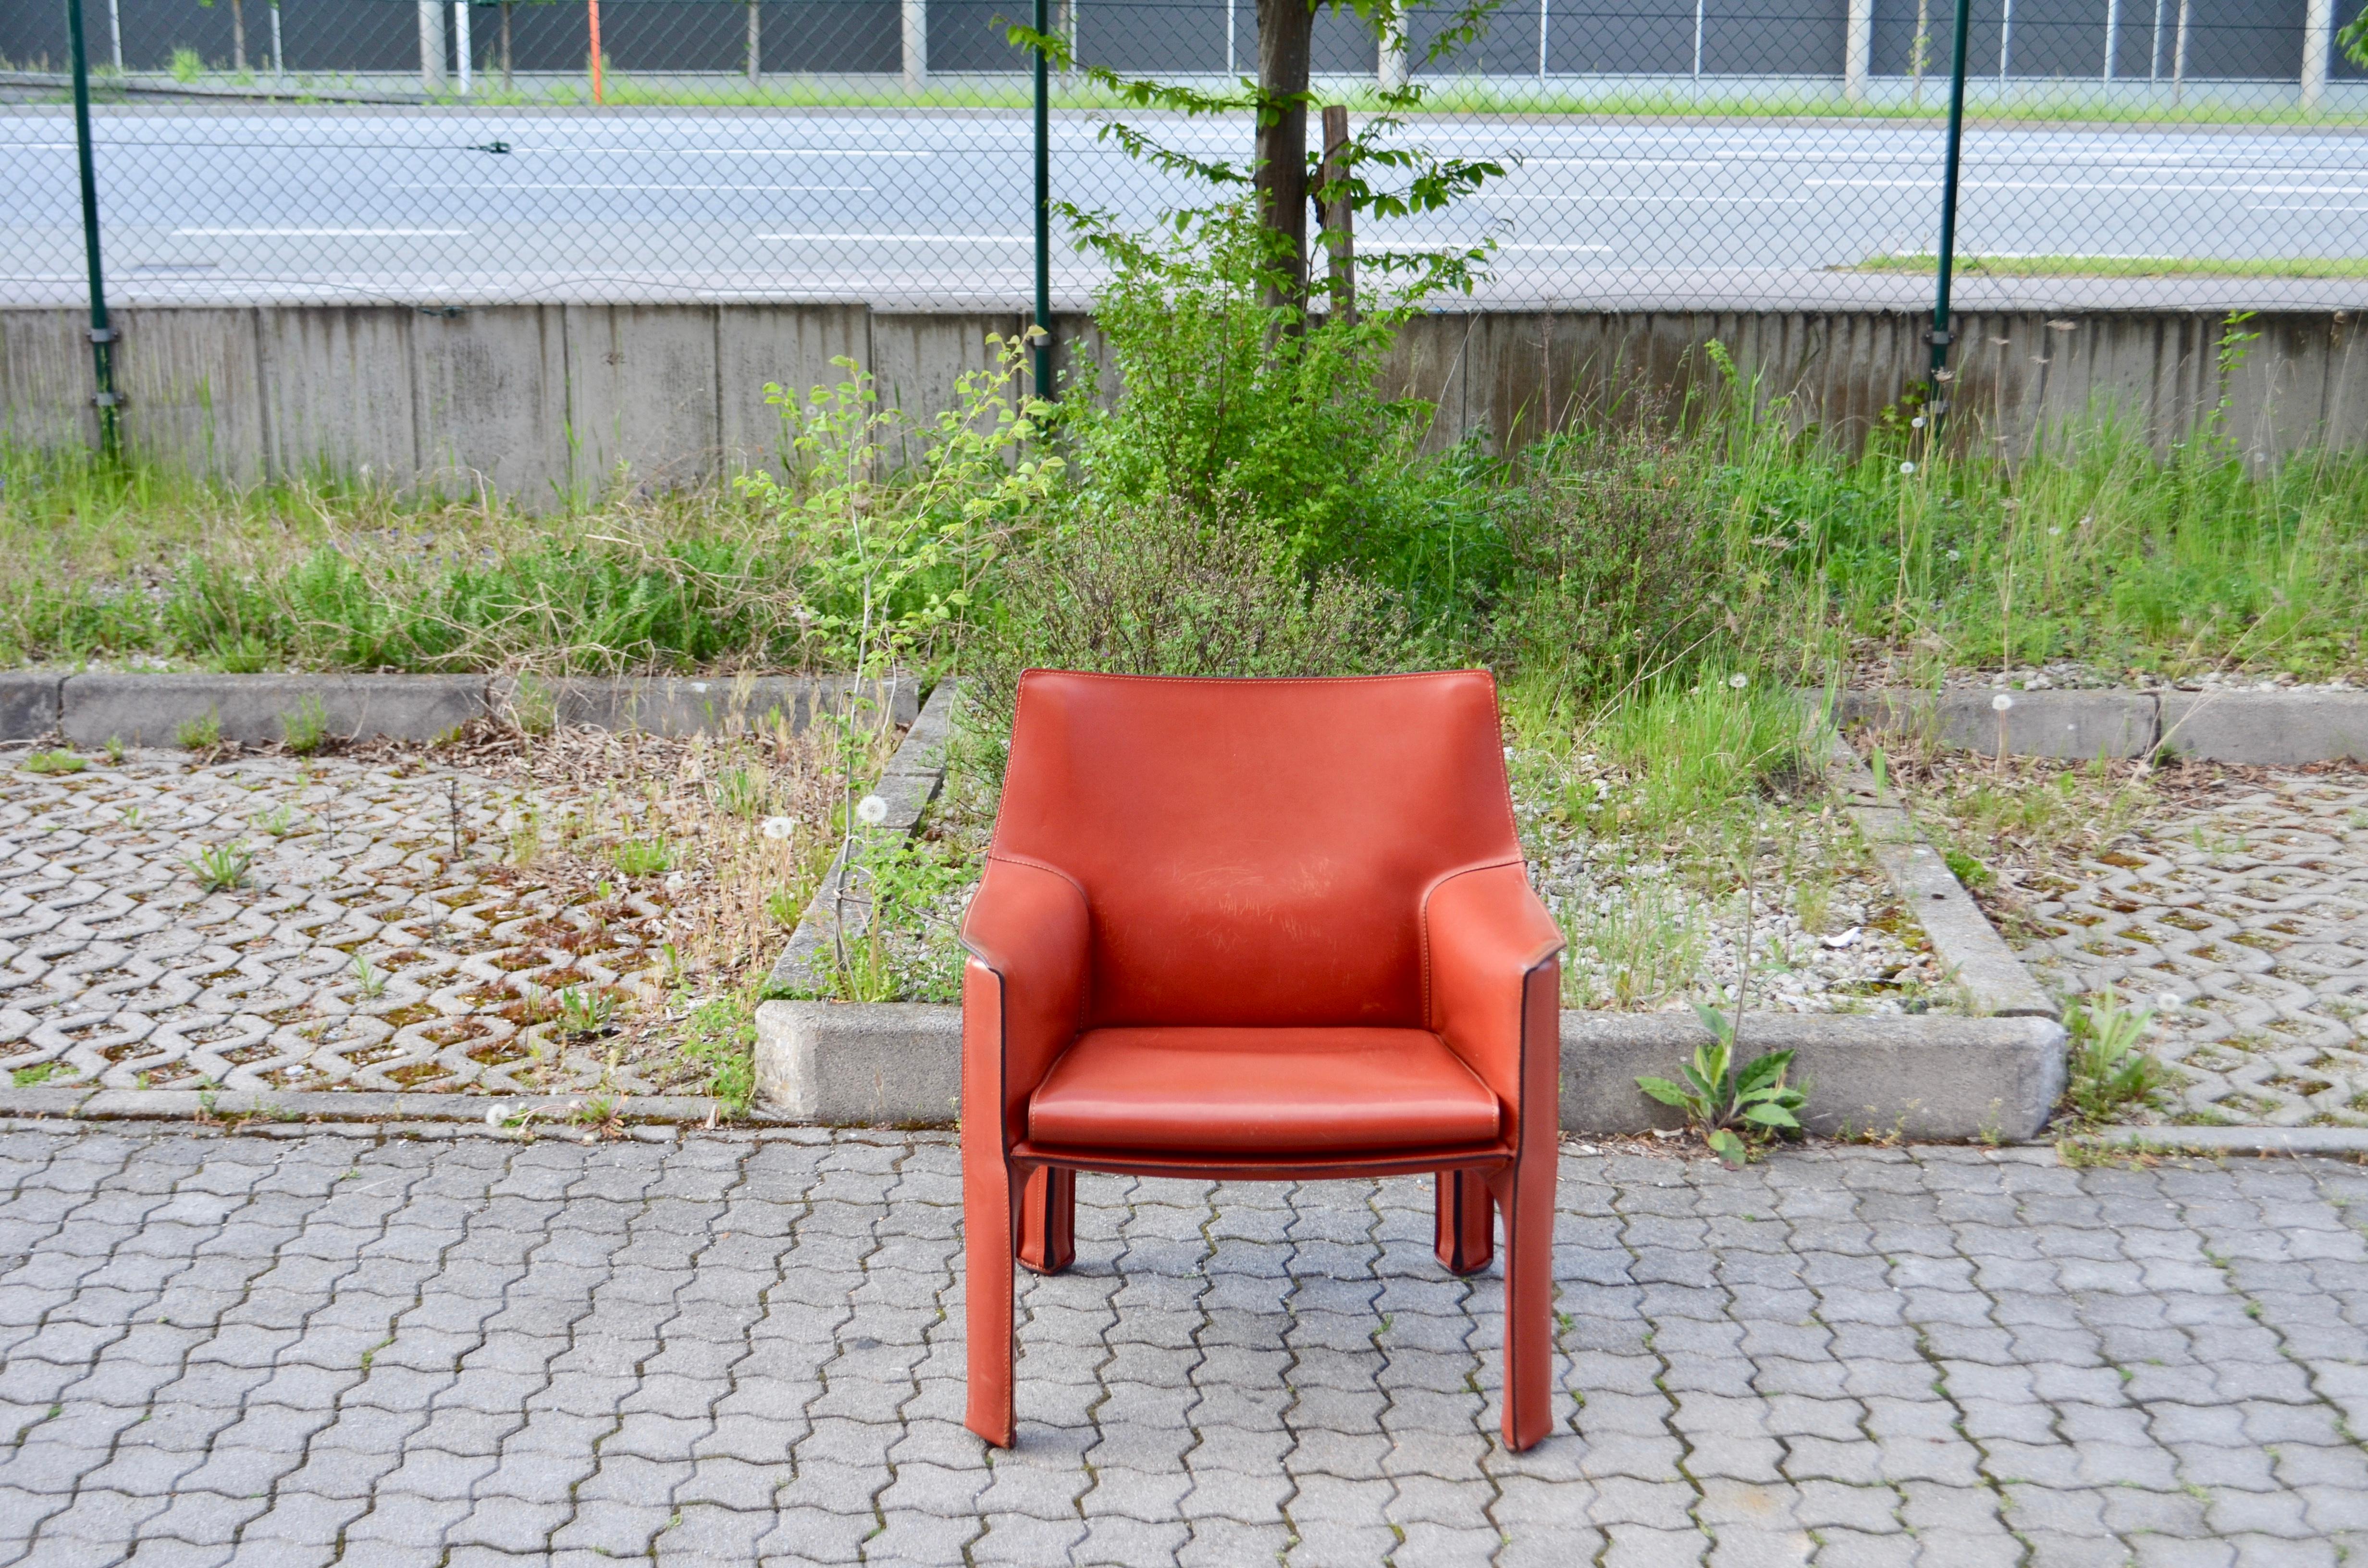 This cab 414 armchair was designed by Mario Bellini for Italian manufacturer Cassina.
It´s the armchair version with comfortable seat padding.
It is upholstered in thick saddle leather, colour China red / Ox red

We have 4 Cab chairs in in this